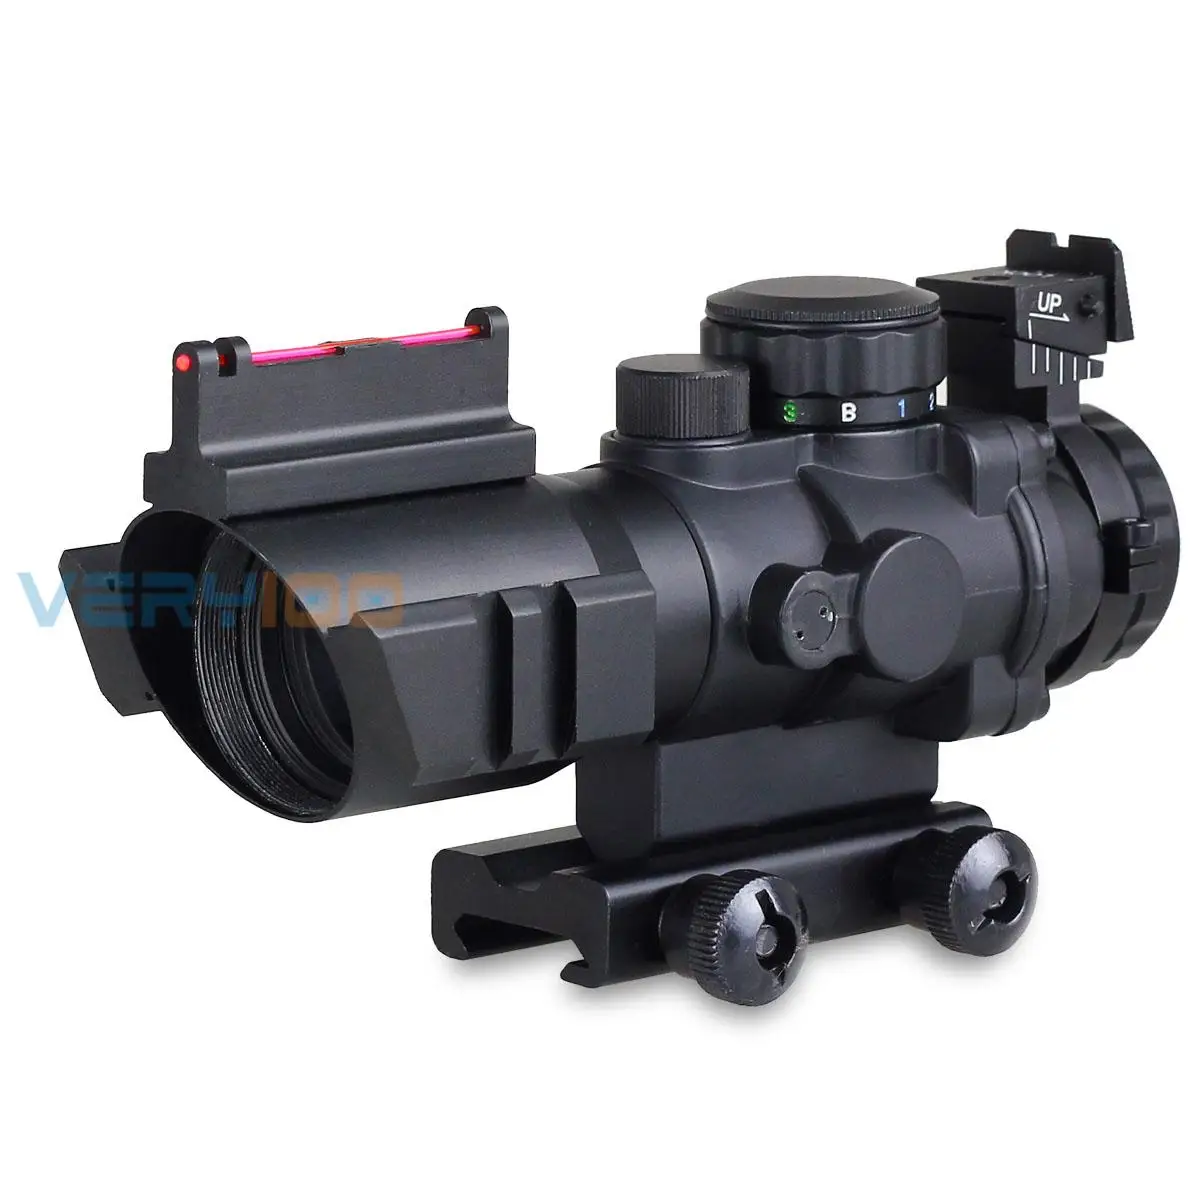 VERY100 New 4x32 RGB Tri-Illuminated Compact Rifle Scope with Red Fiber Optics Sight Etched Glass